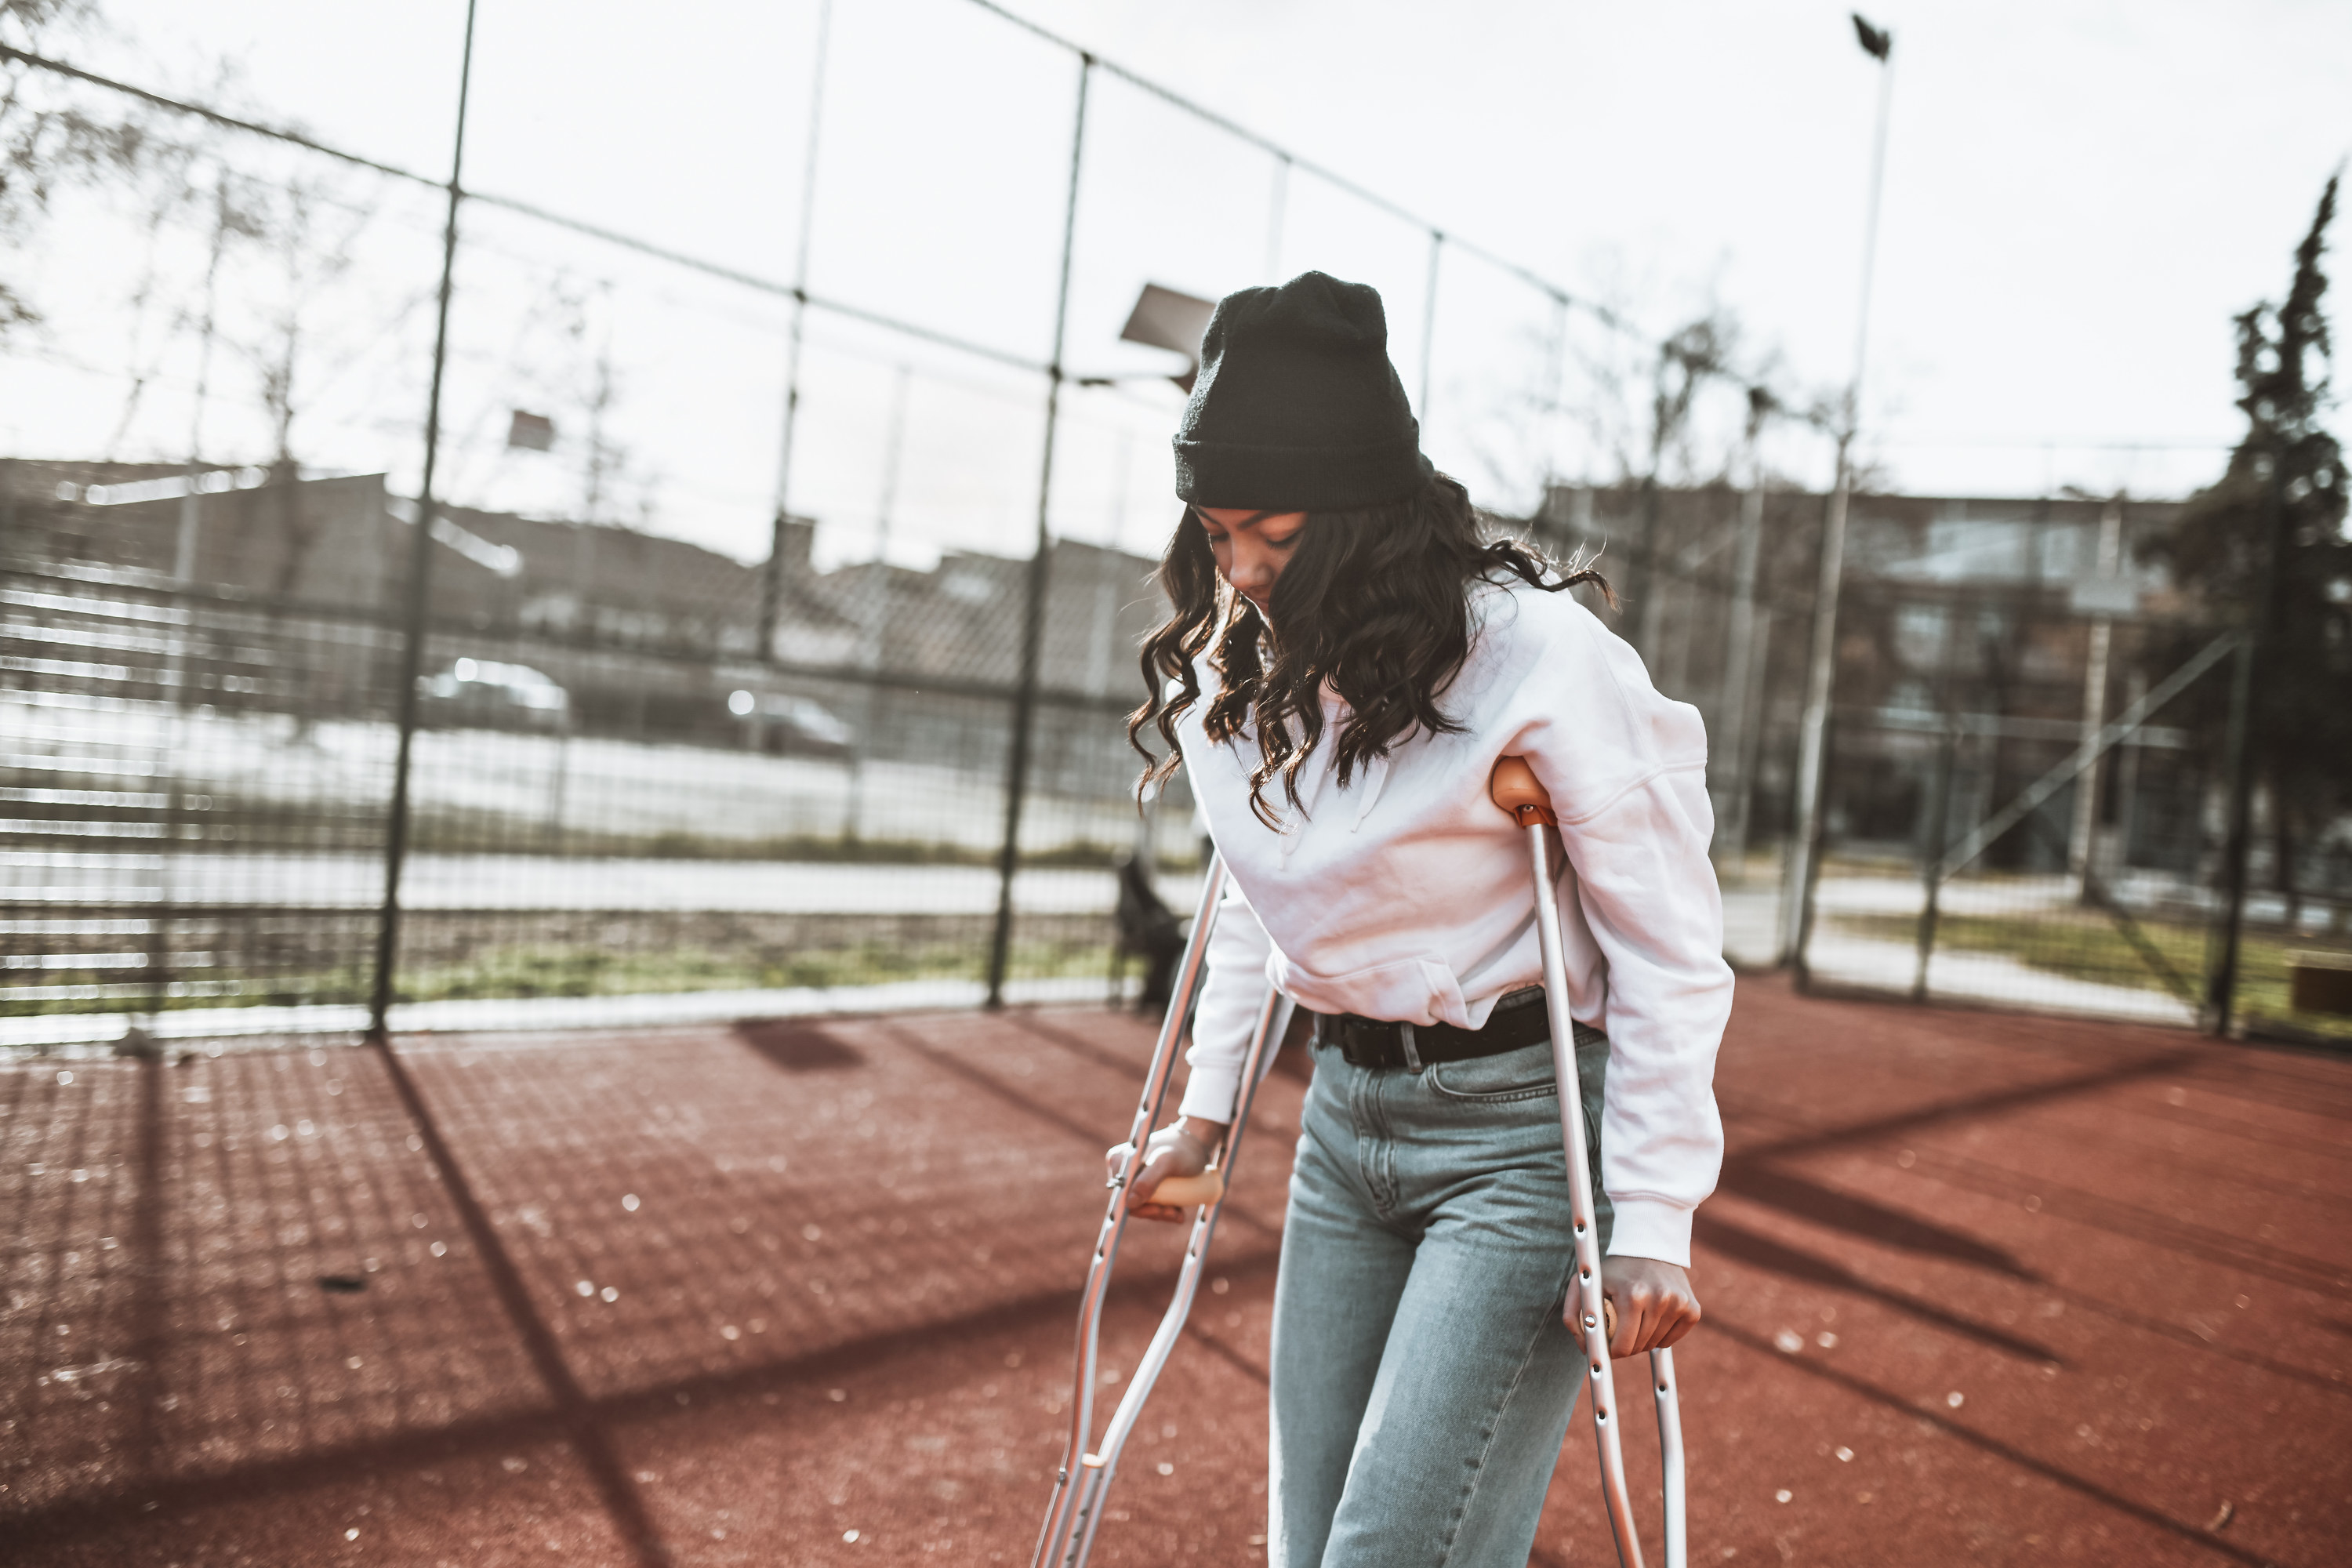 A woman on crutches walks by a playground